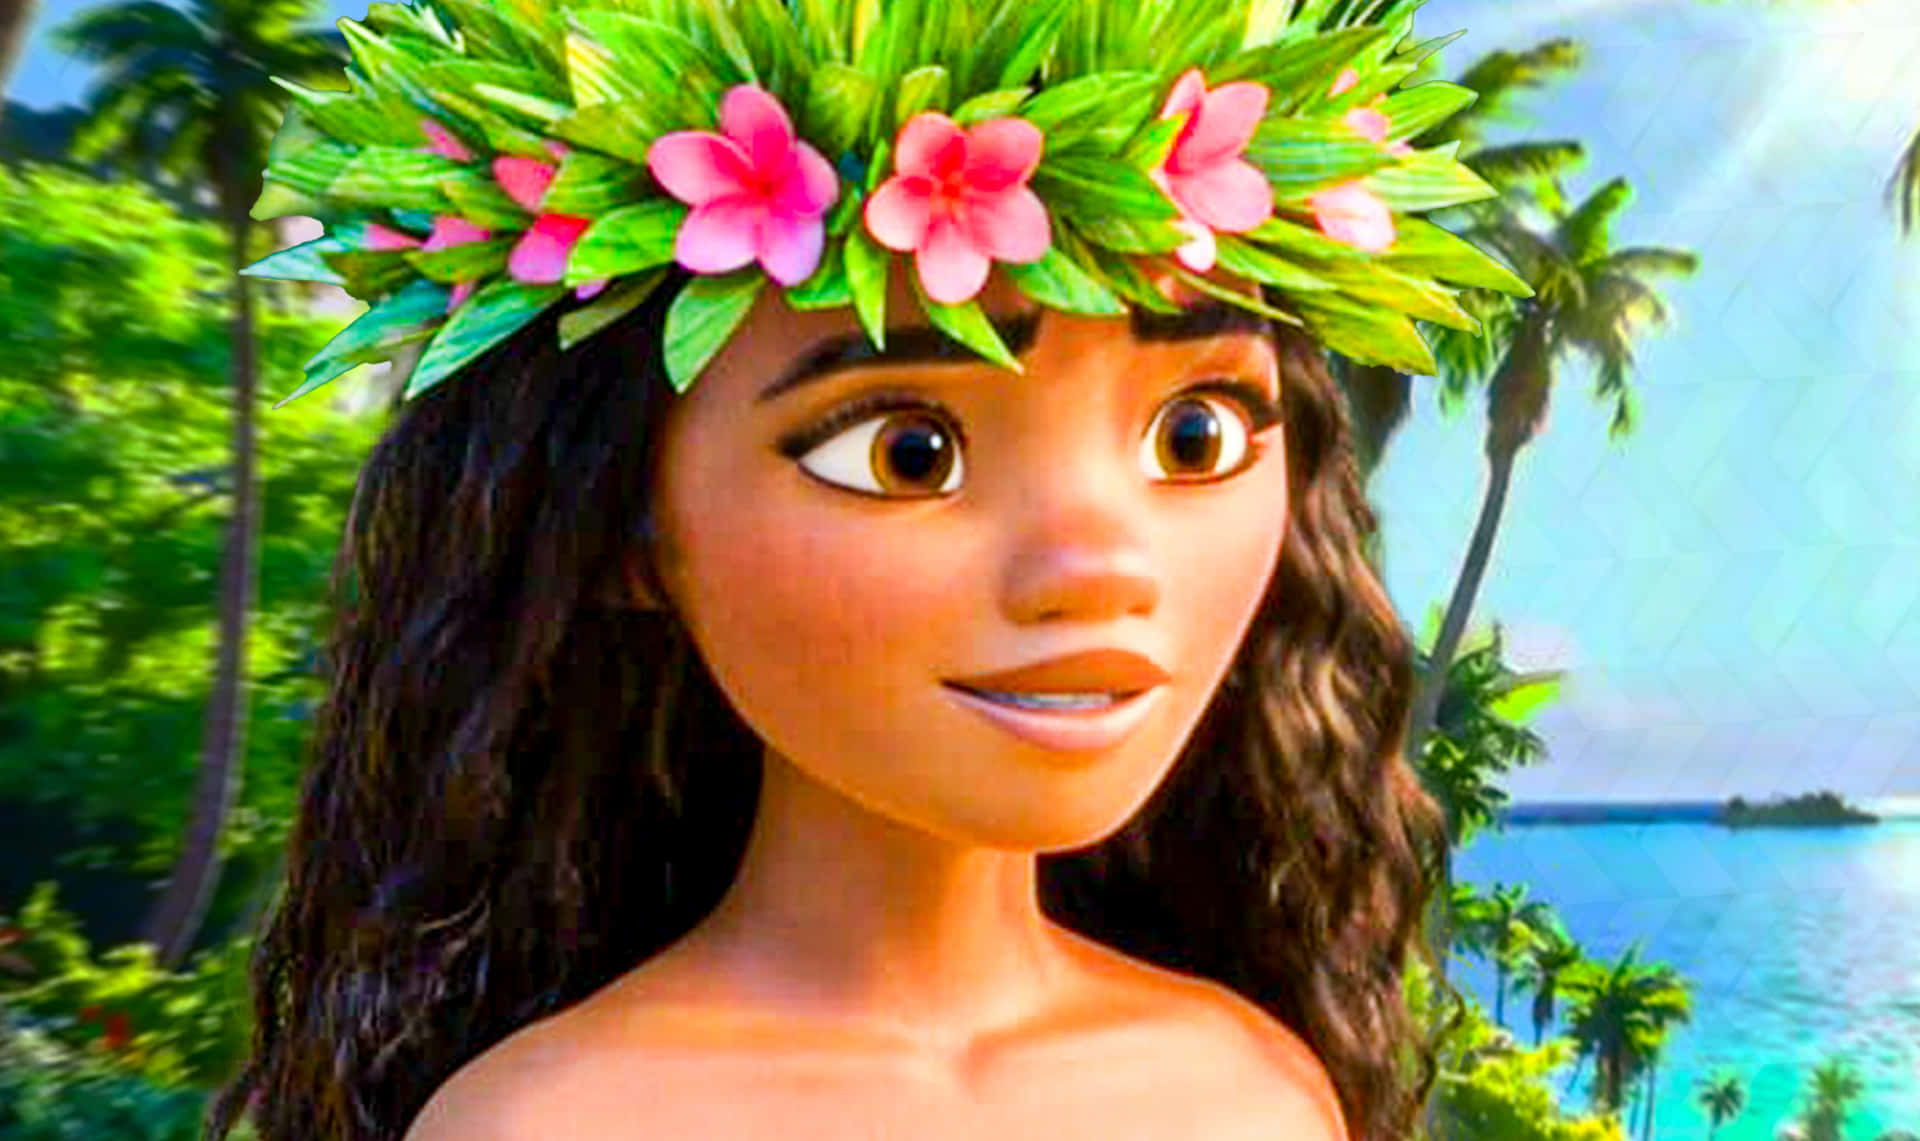 Moana using her powers to unlock the mysteries of the ocean